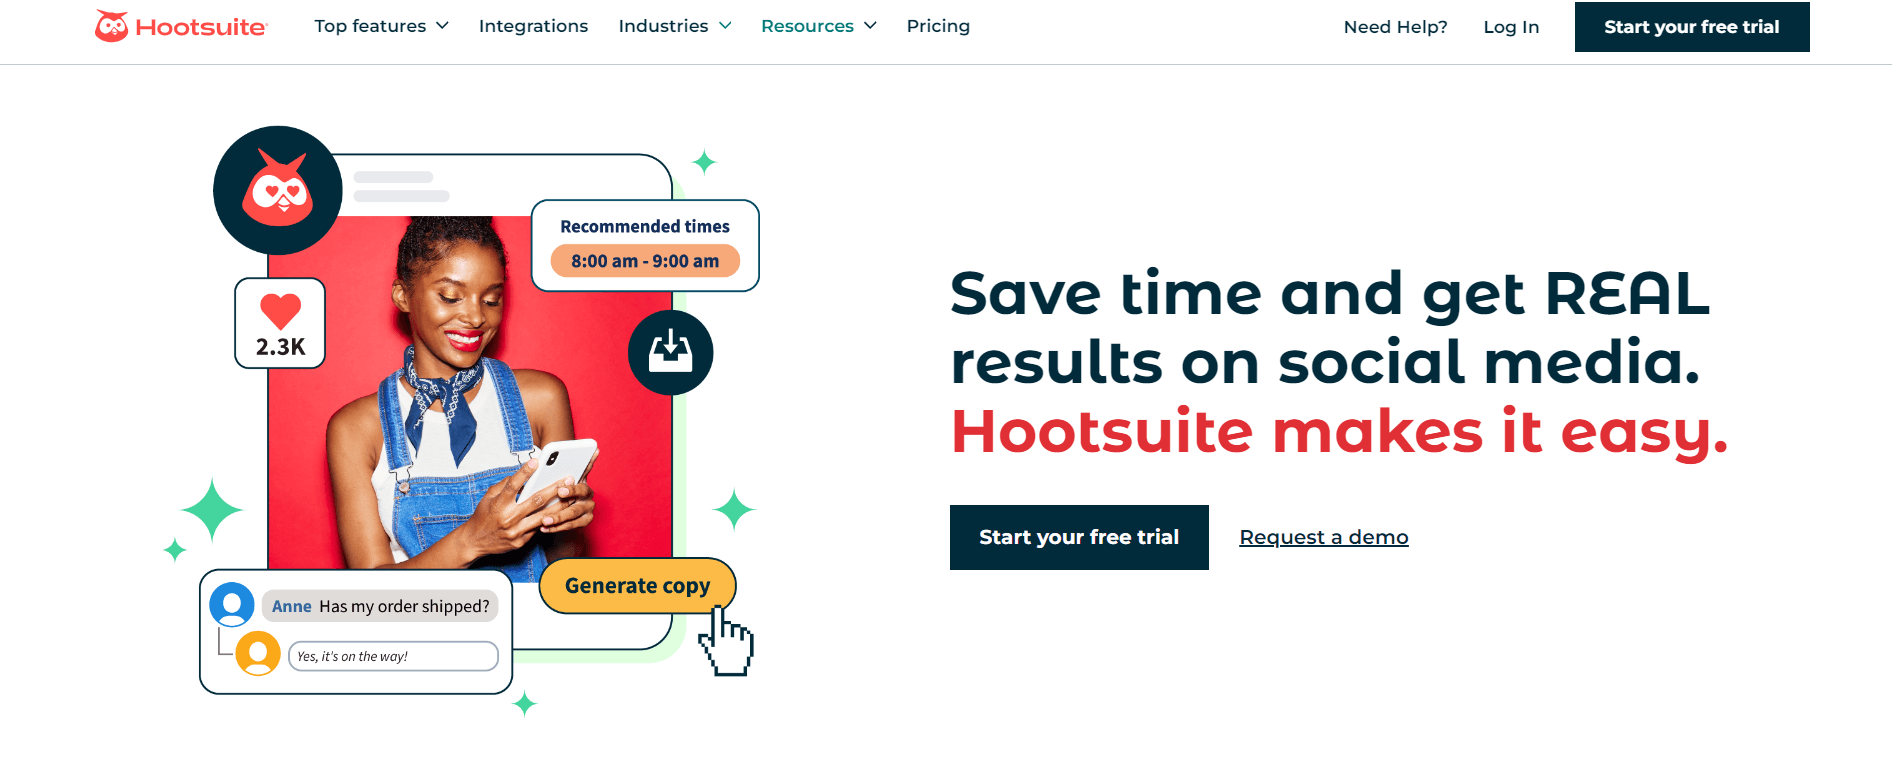 Hootsuite homepage interface